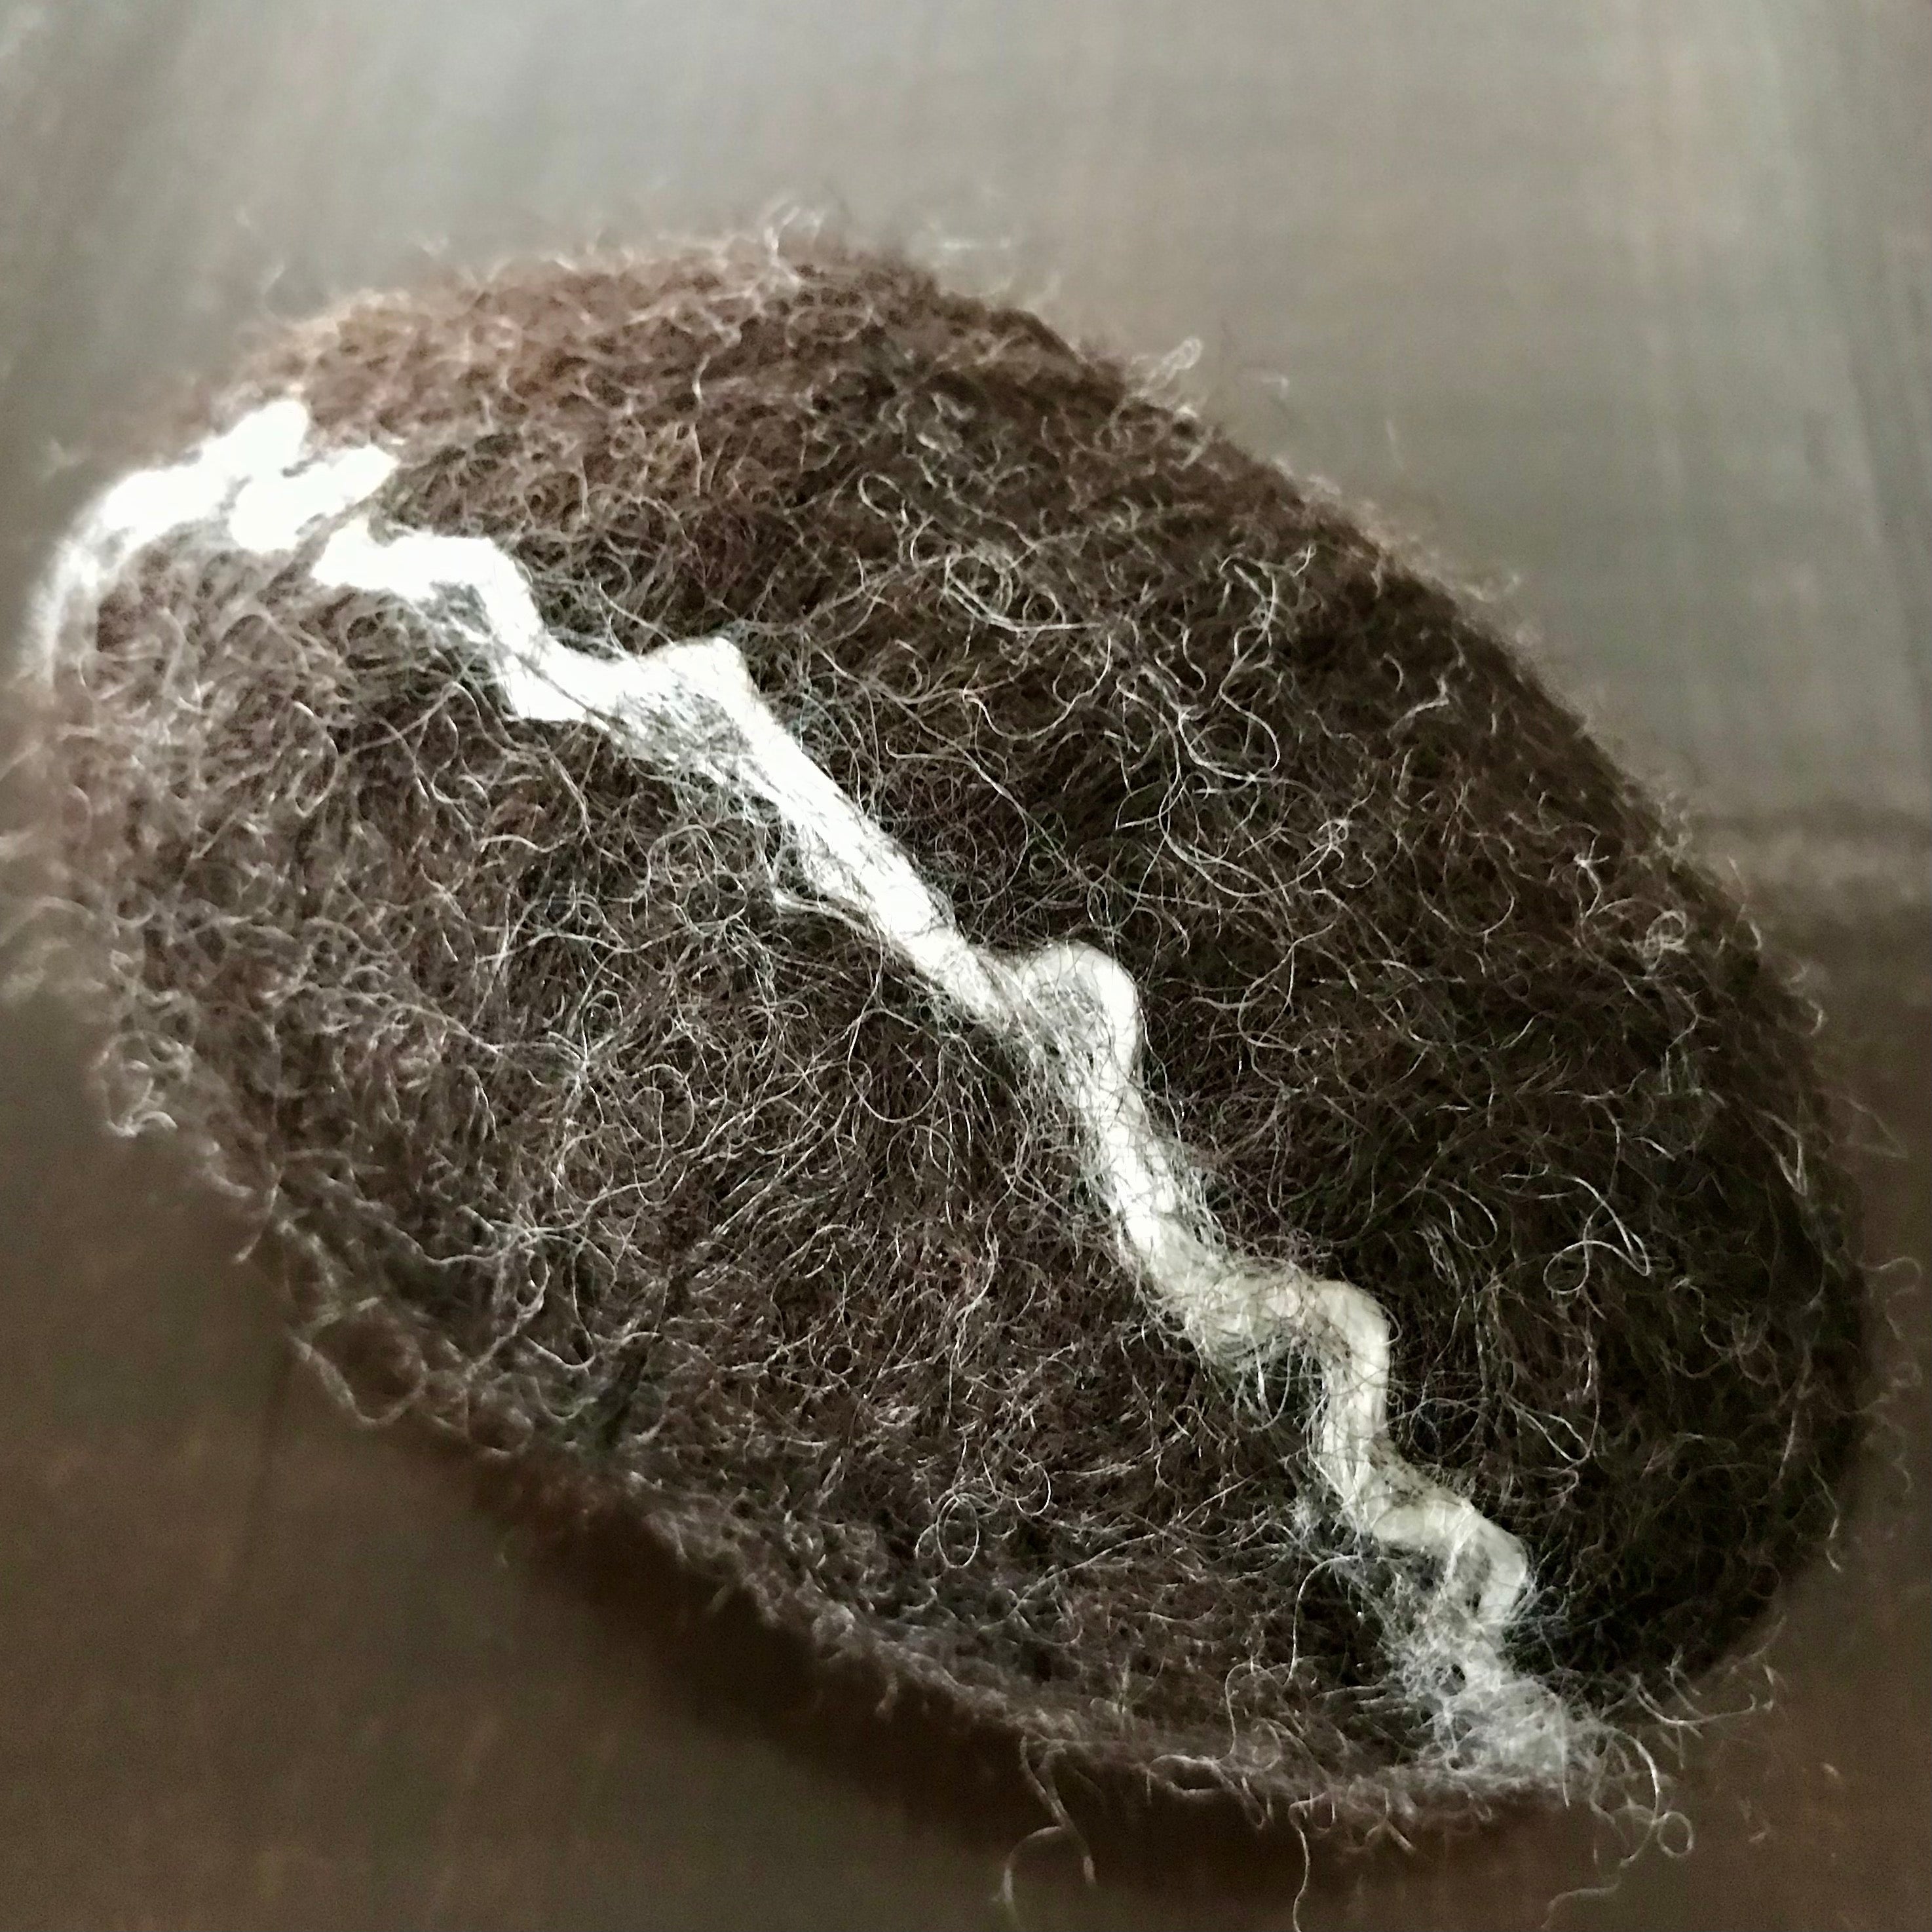 Felted Activated Charcoal Oval Soap